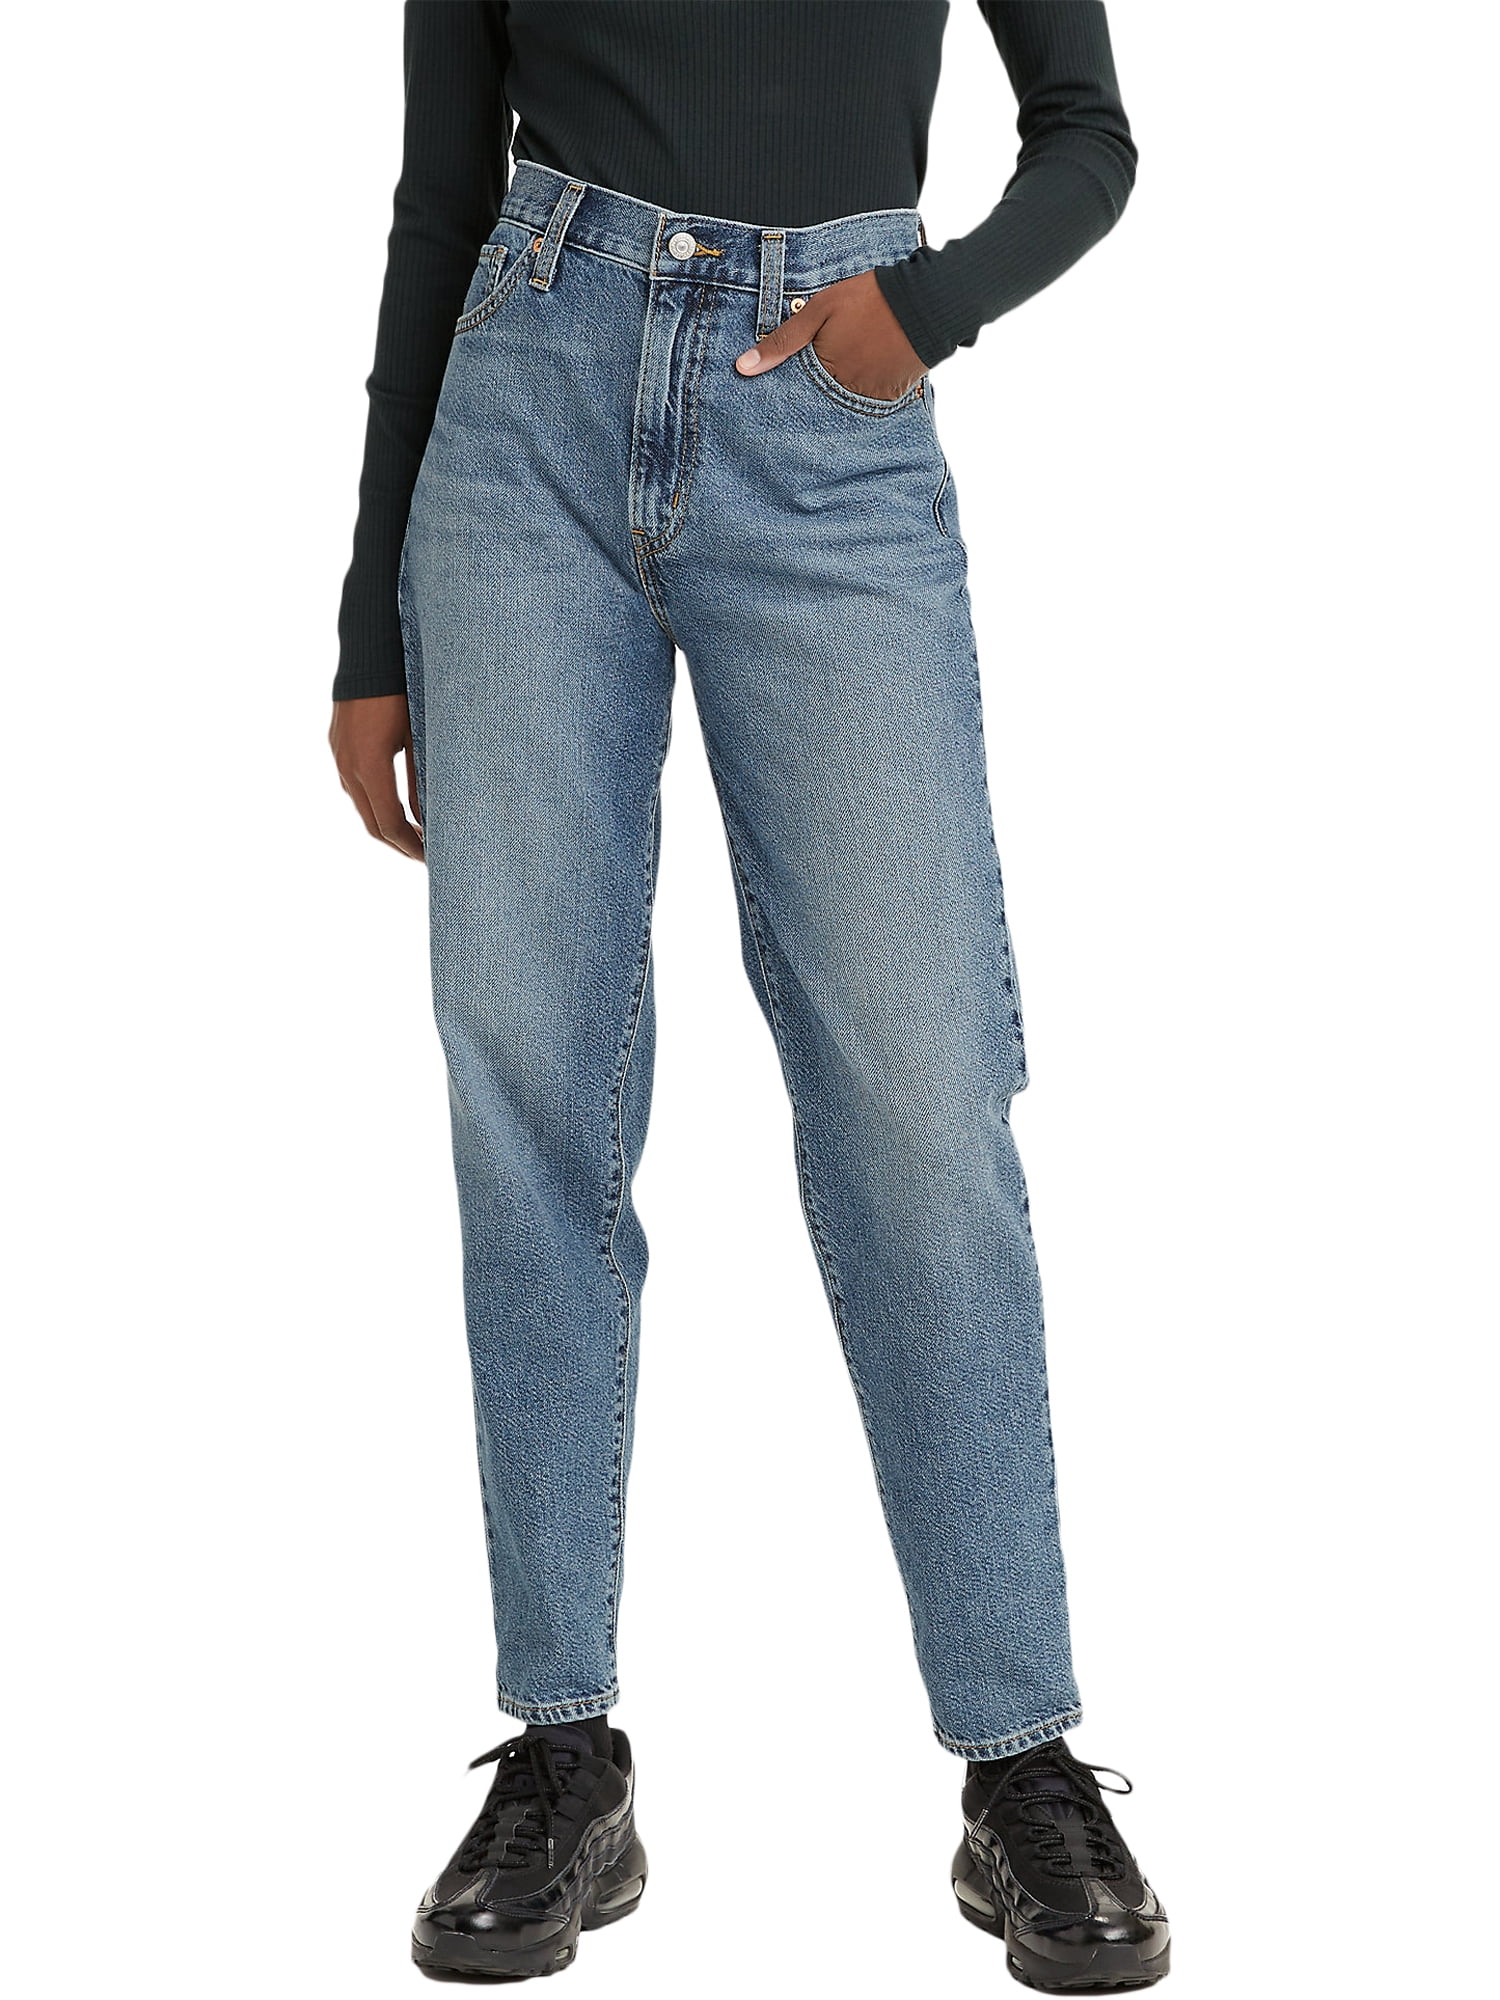 Levi's Original Red Tab Women's High-Waisted Mom Jeans